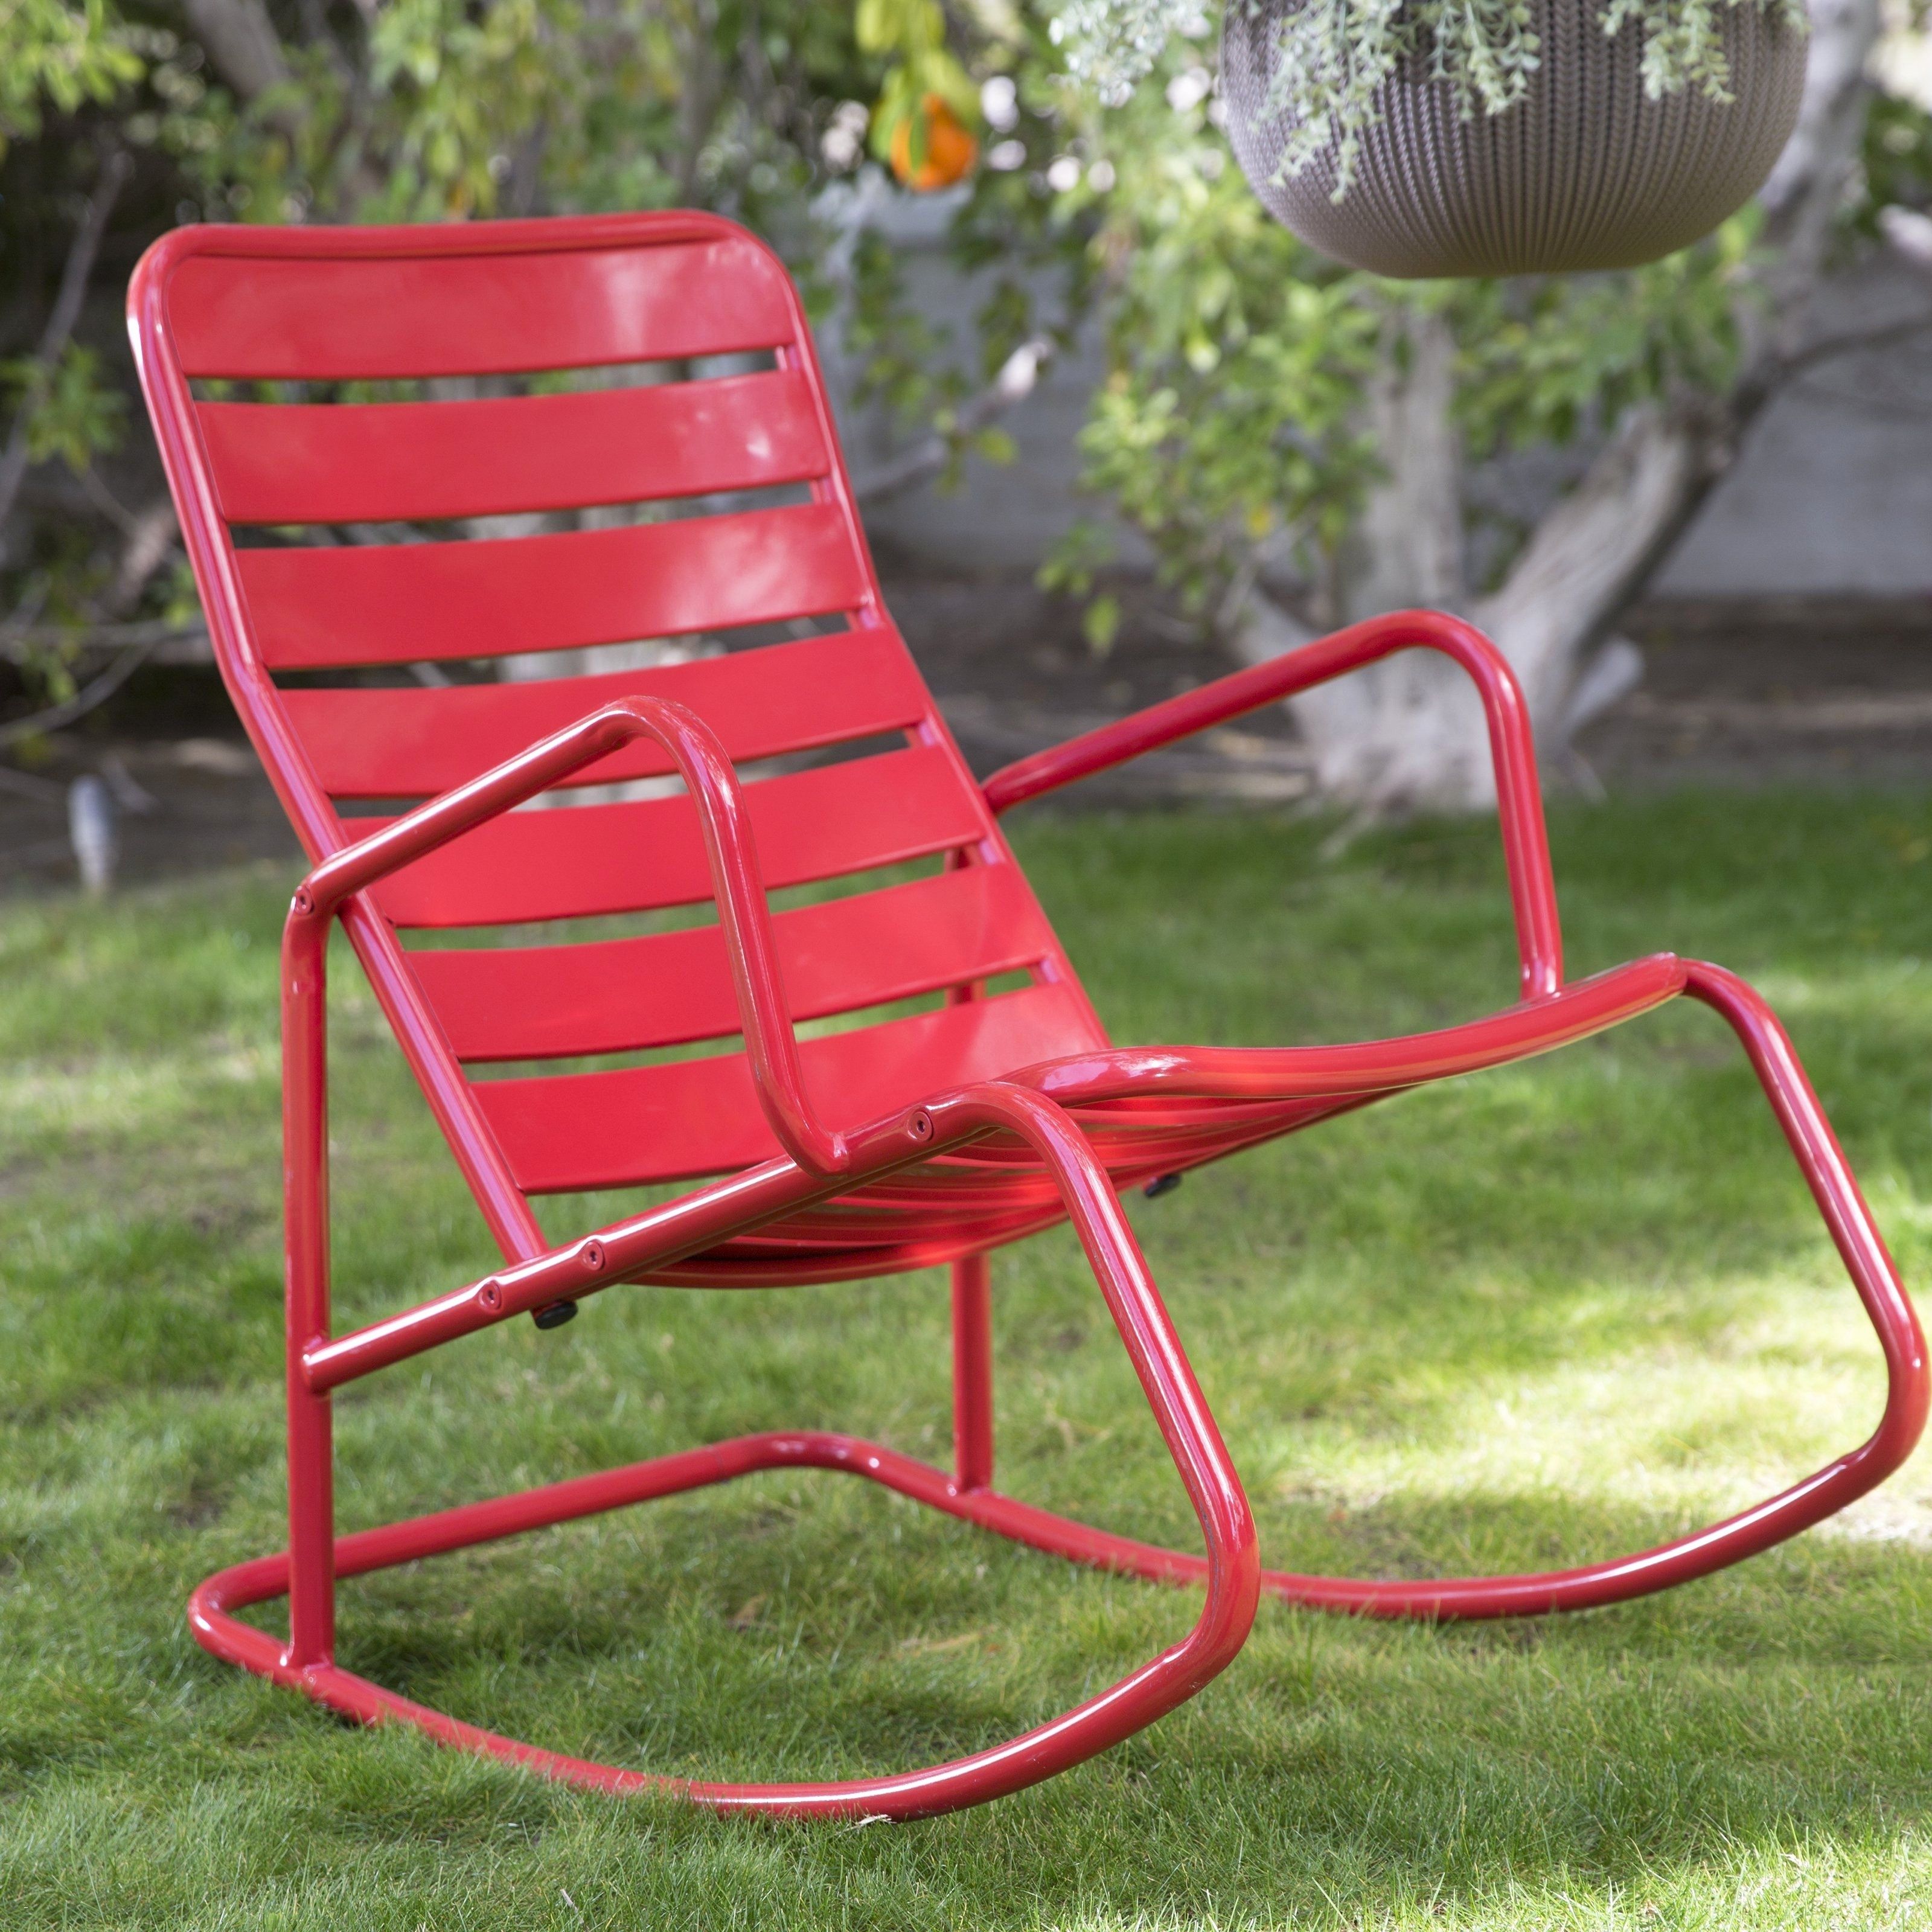 Metal Patio Rocking Chairs Elegant Wicker Patio Rocker Best Outdoor Intended For Patio Metal Rocking Chairs (View 4 of 15)